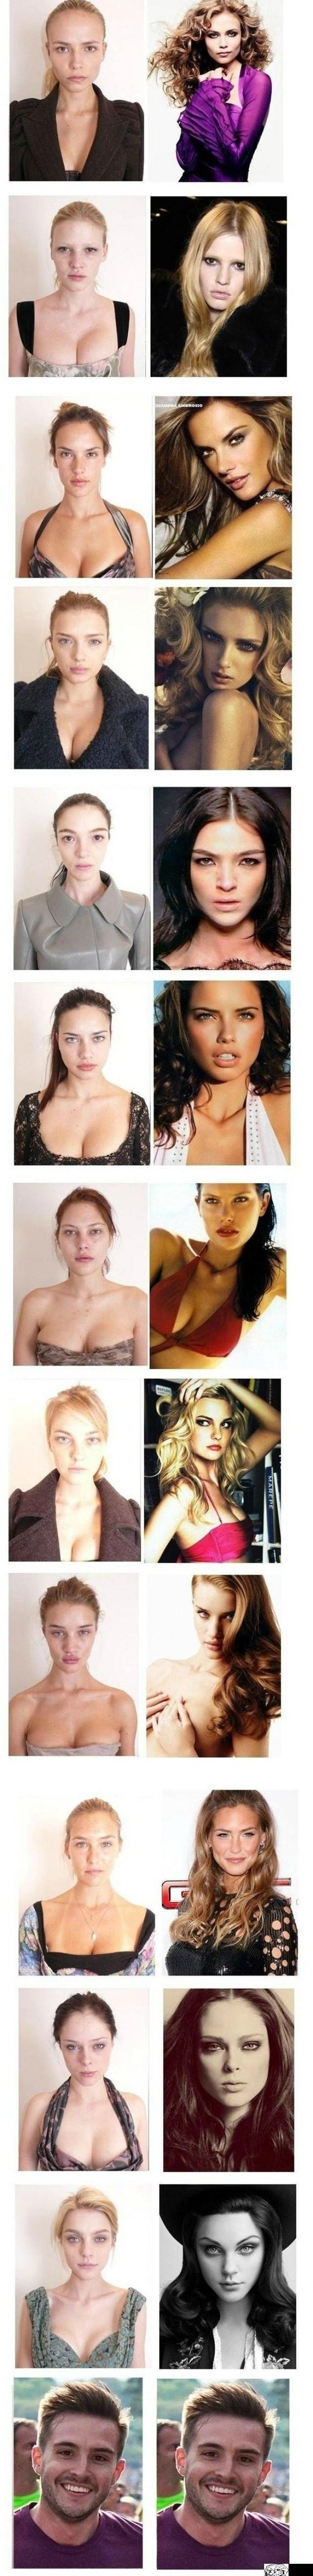 Supermodels without make-up... WAIT FOR IT!